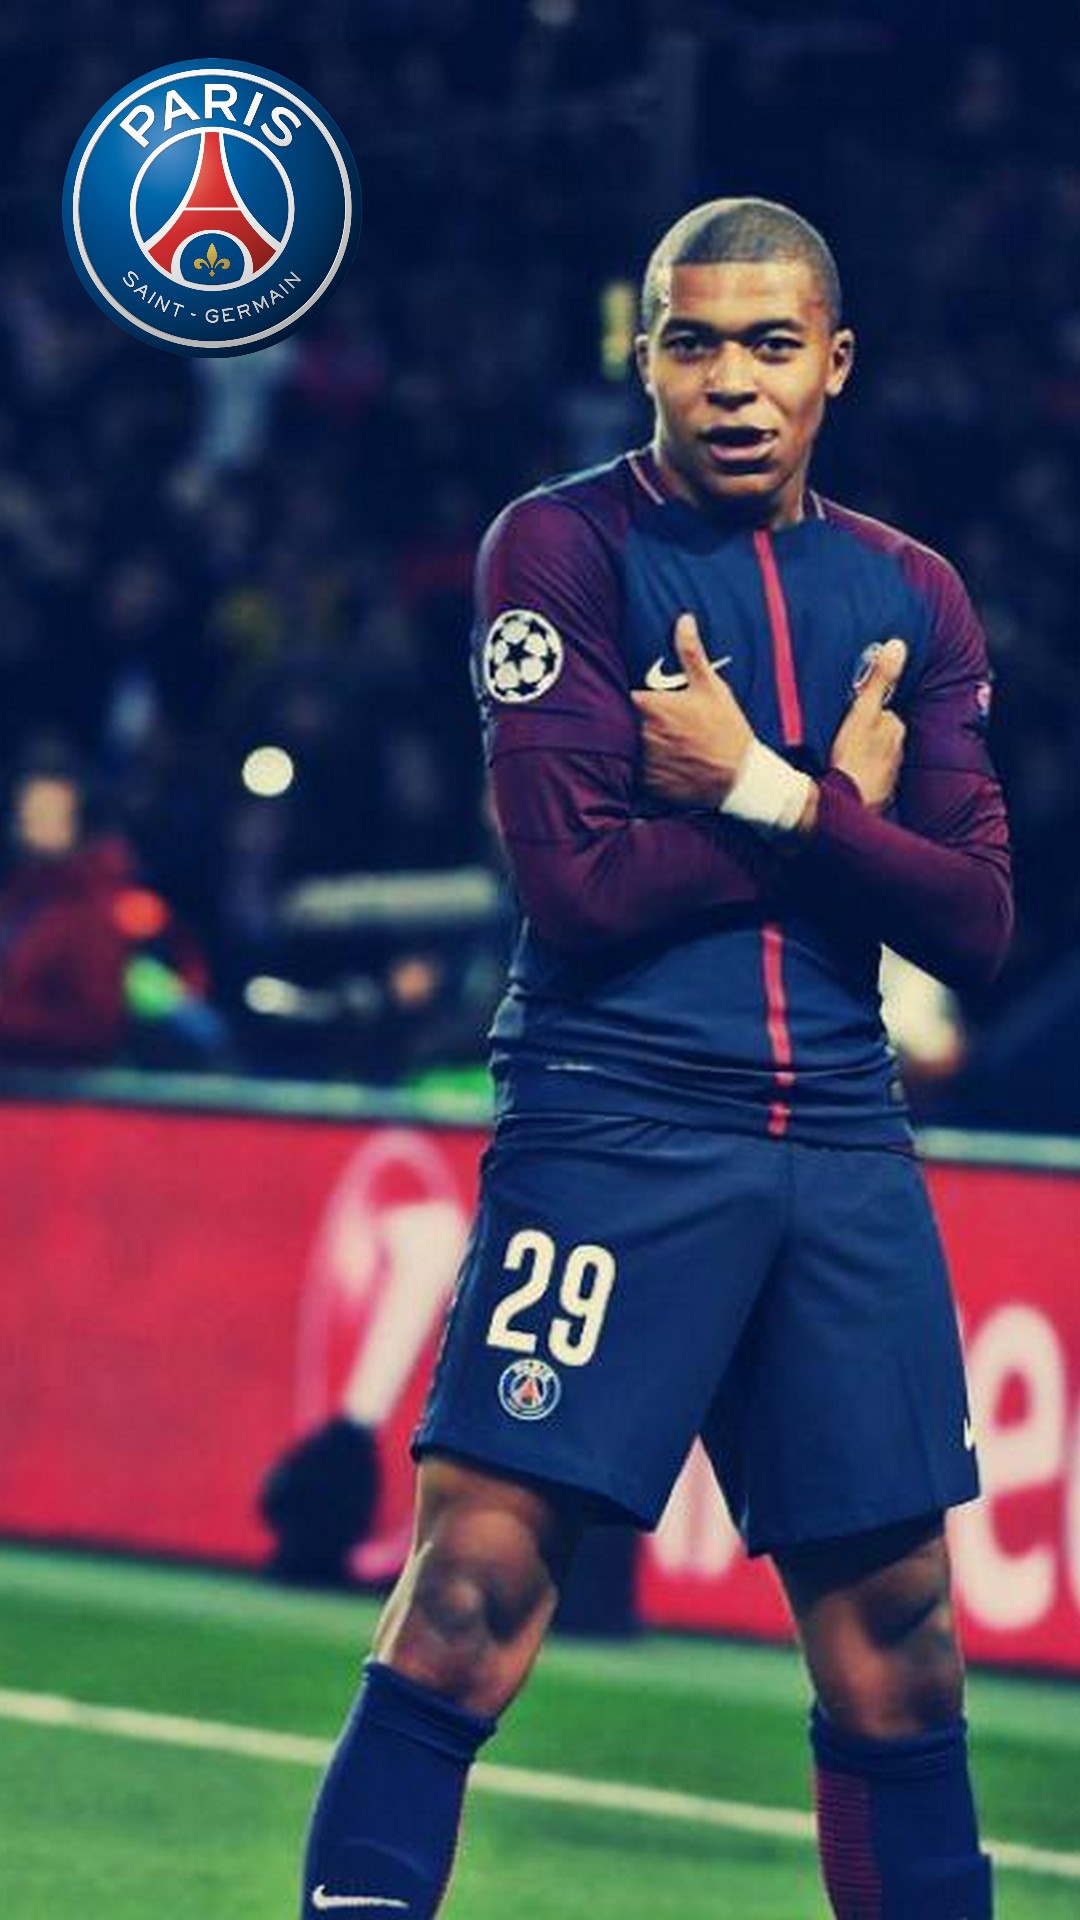 iPhone Wallpaper HD Kylian Mbappe PSG With Resolution 1080X1920 pixel. You can make this wallpaper for your Mac or Windows Desktop Background, iPhone, Android or Tablet and another Smartphone device for free